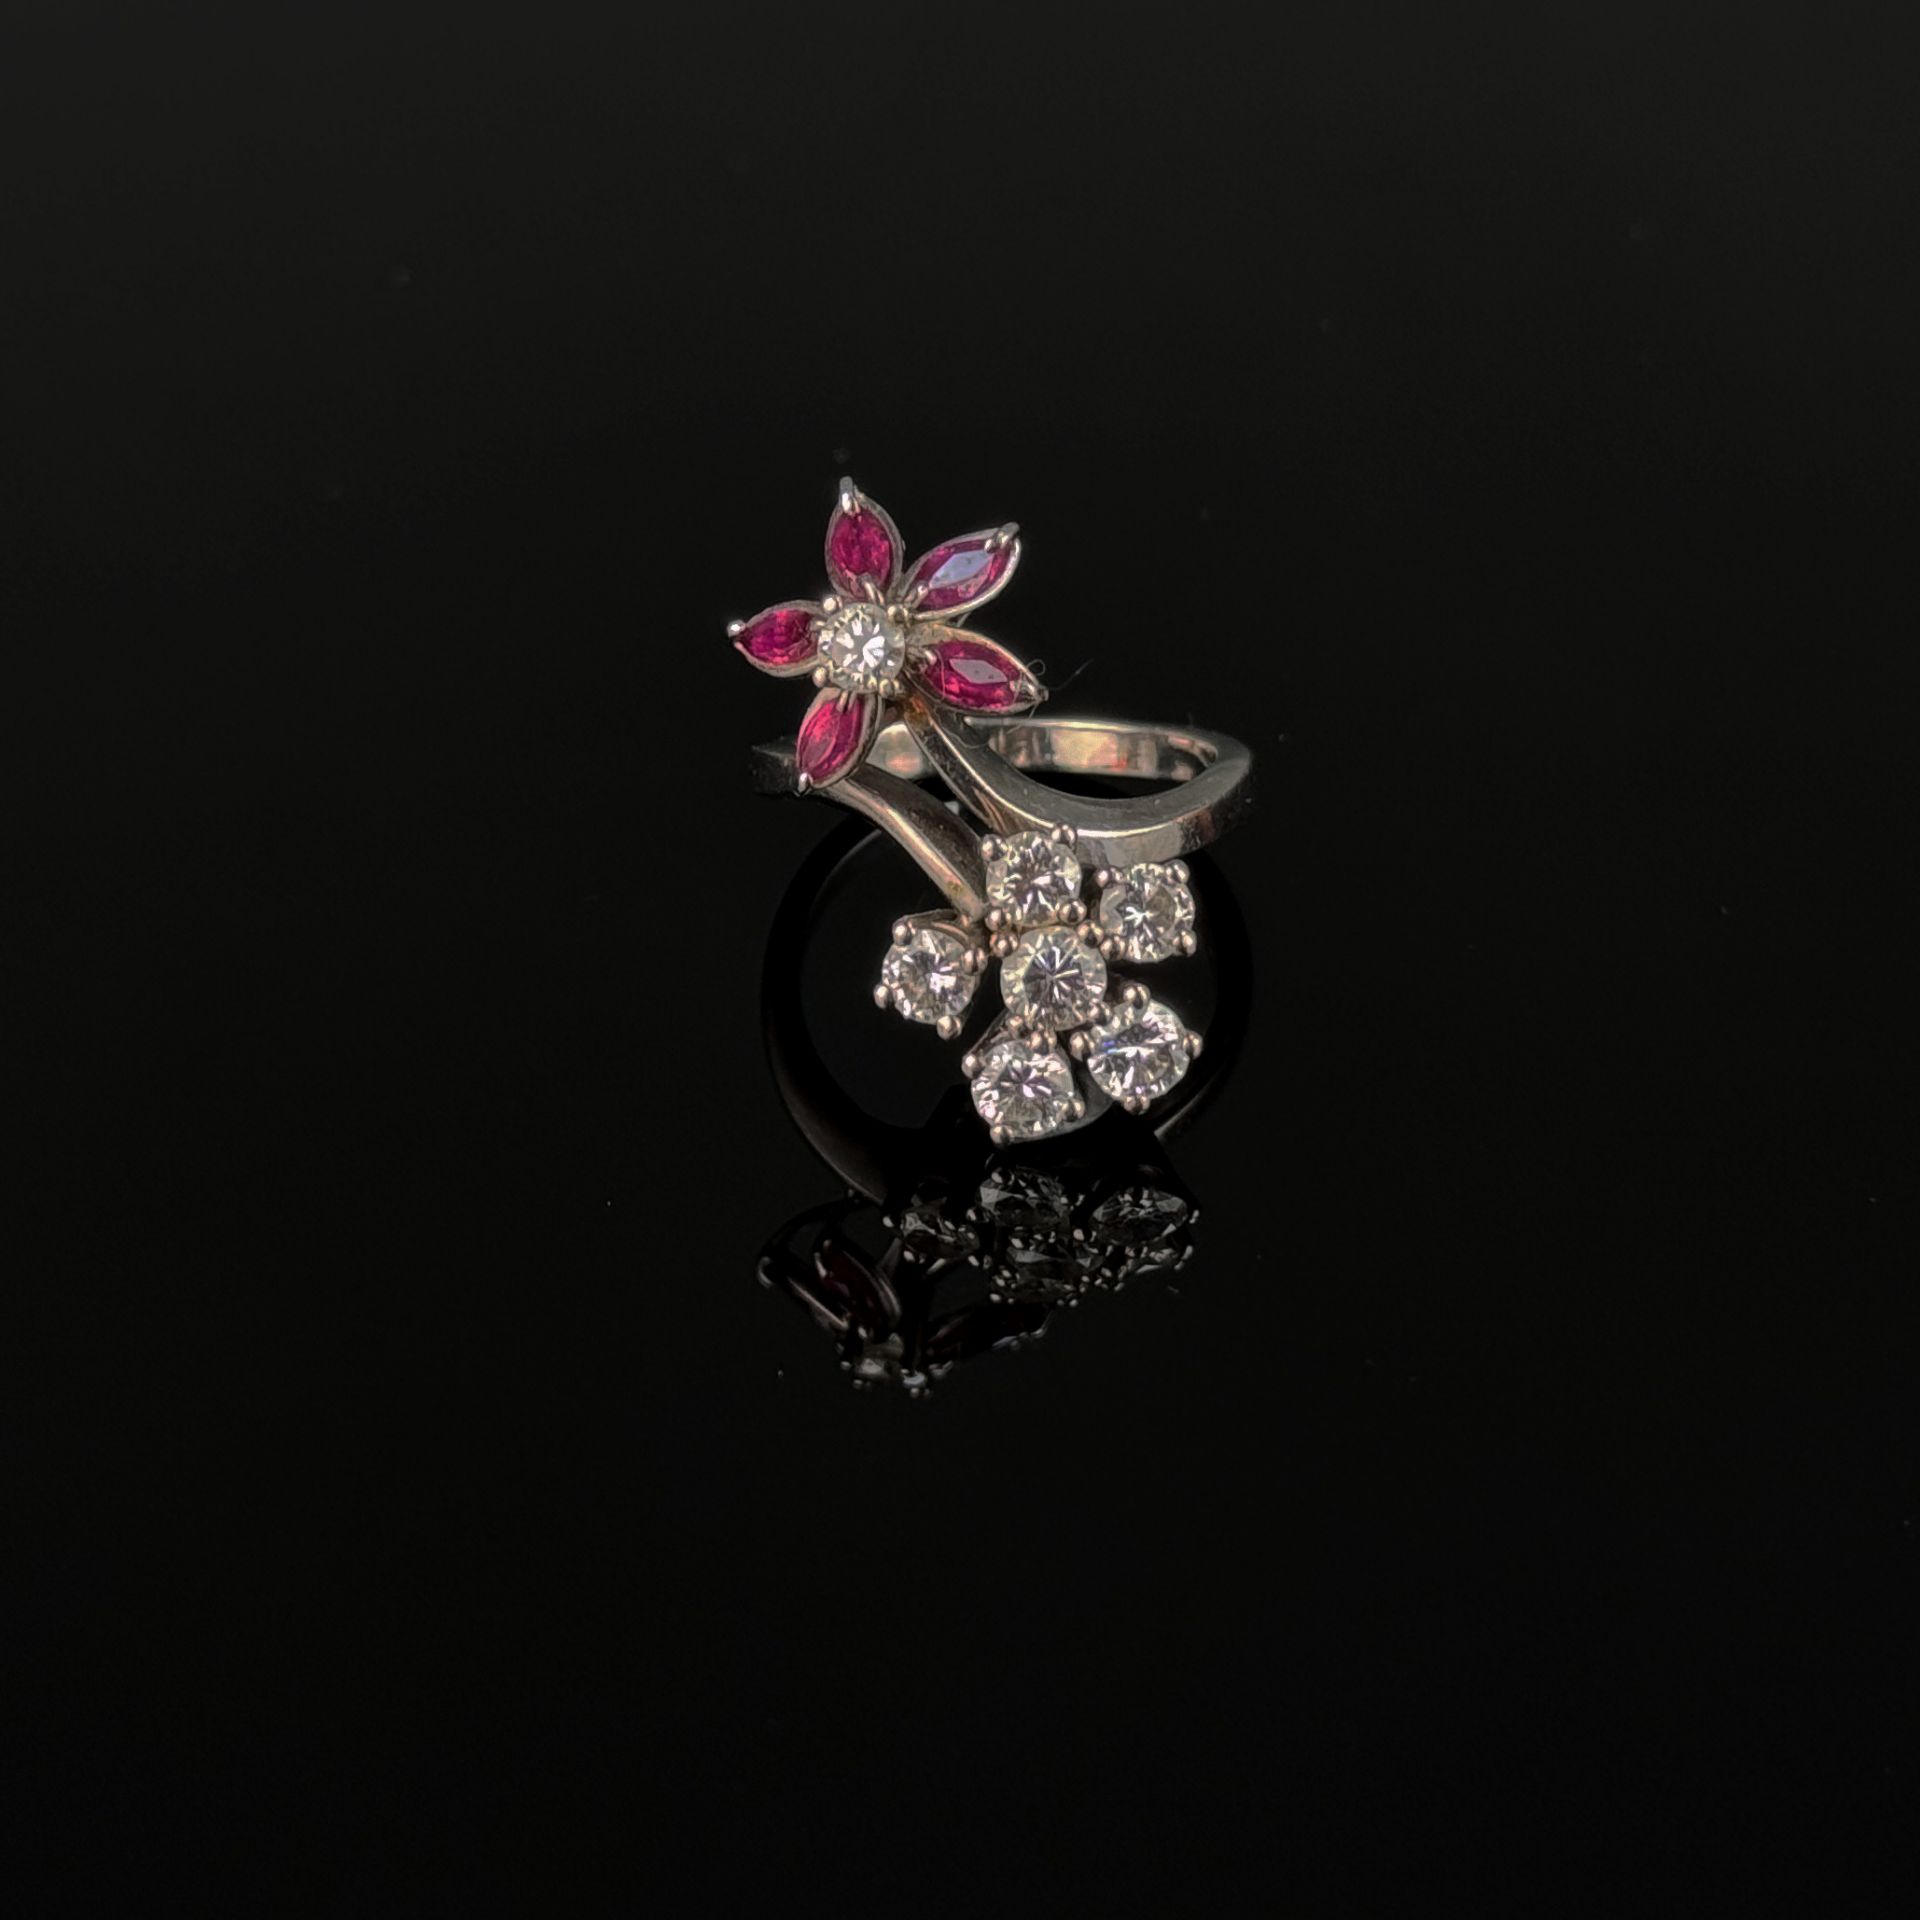 Fancy ruby diamond ring, 585/14K white gold (hallmarked), 6.62 g, shaped as two flowers on the fron - Image 2 of 3